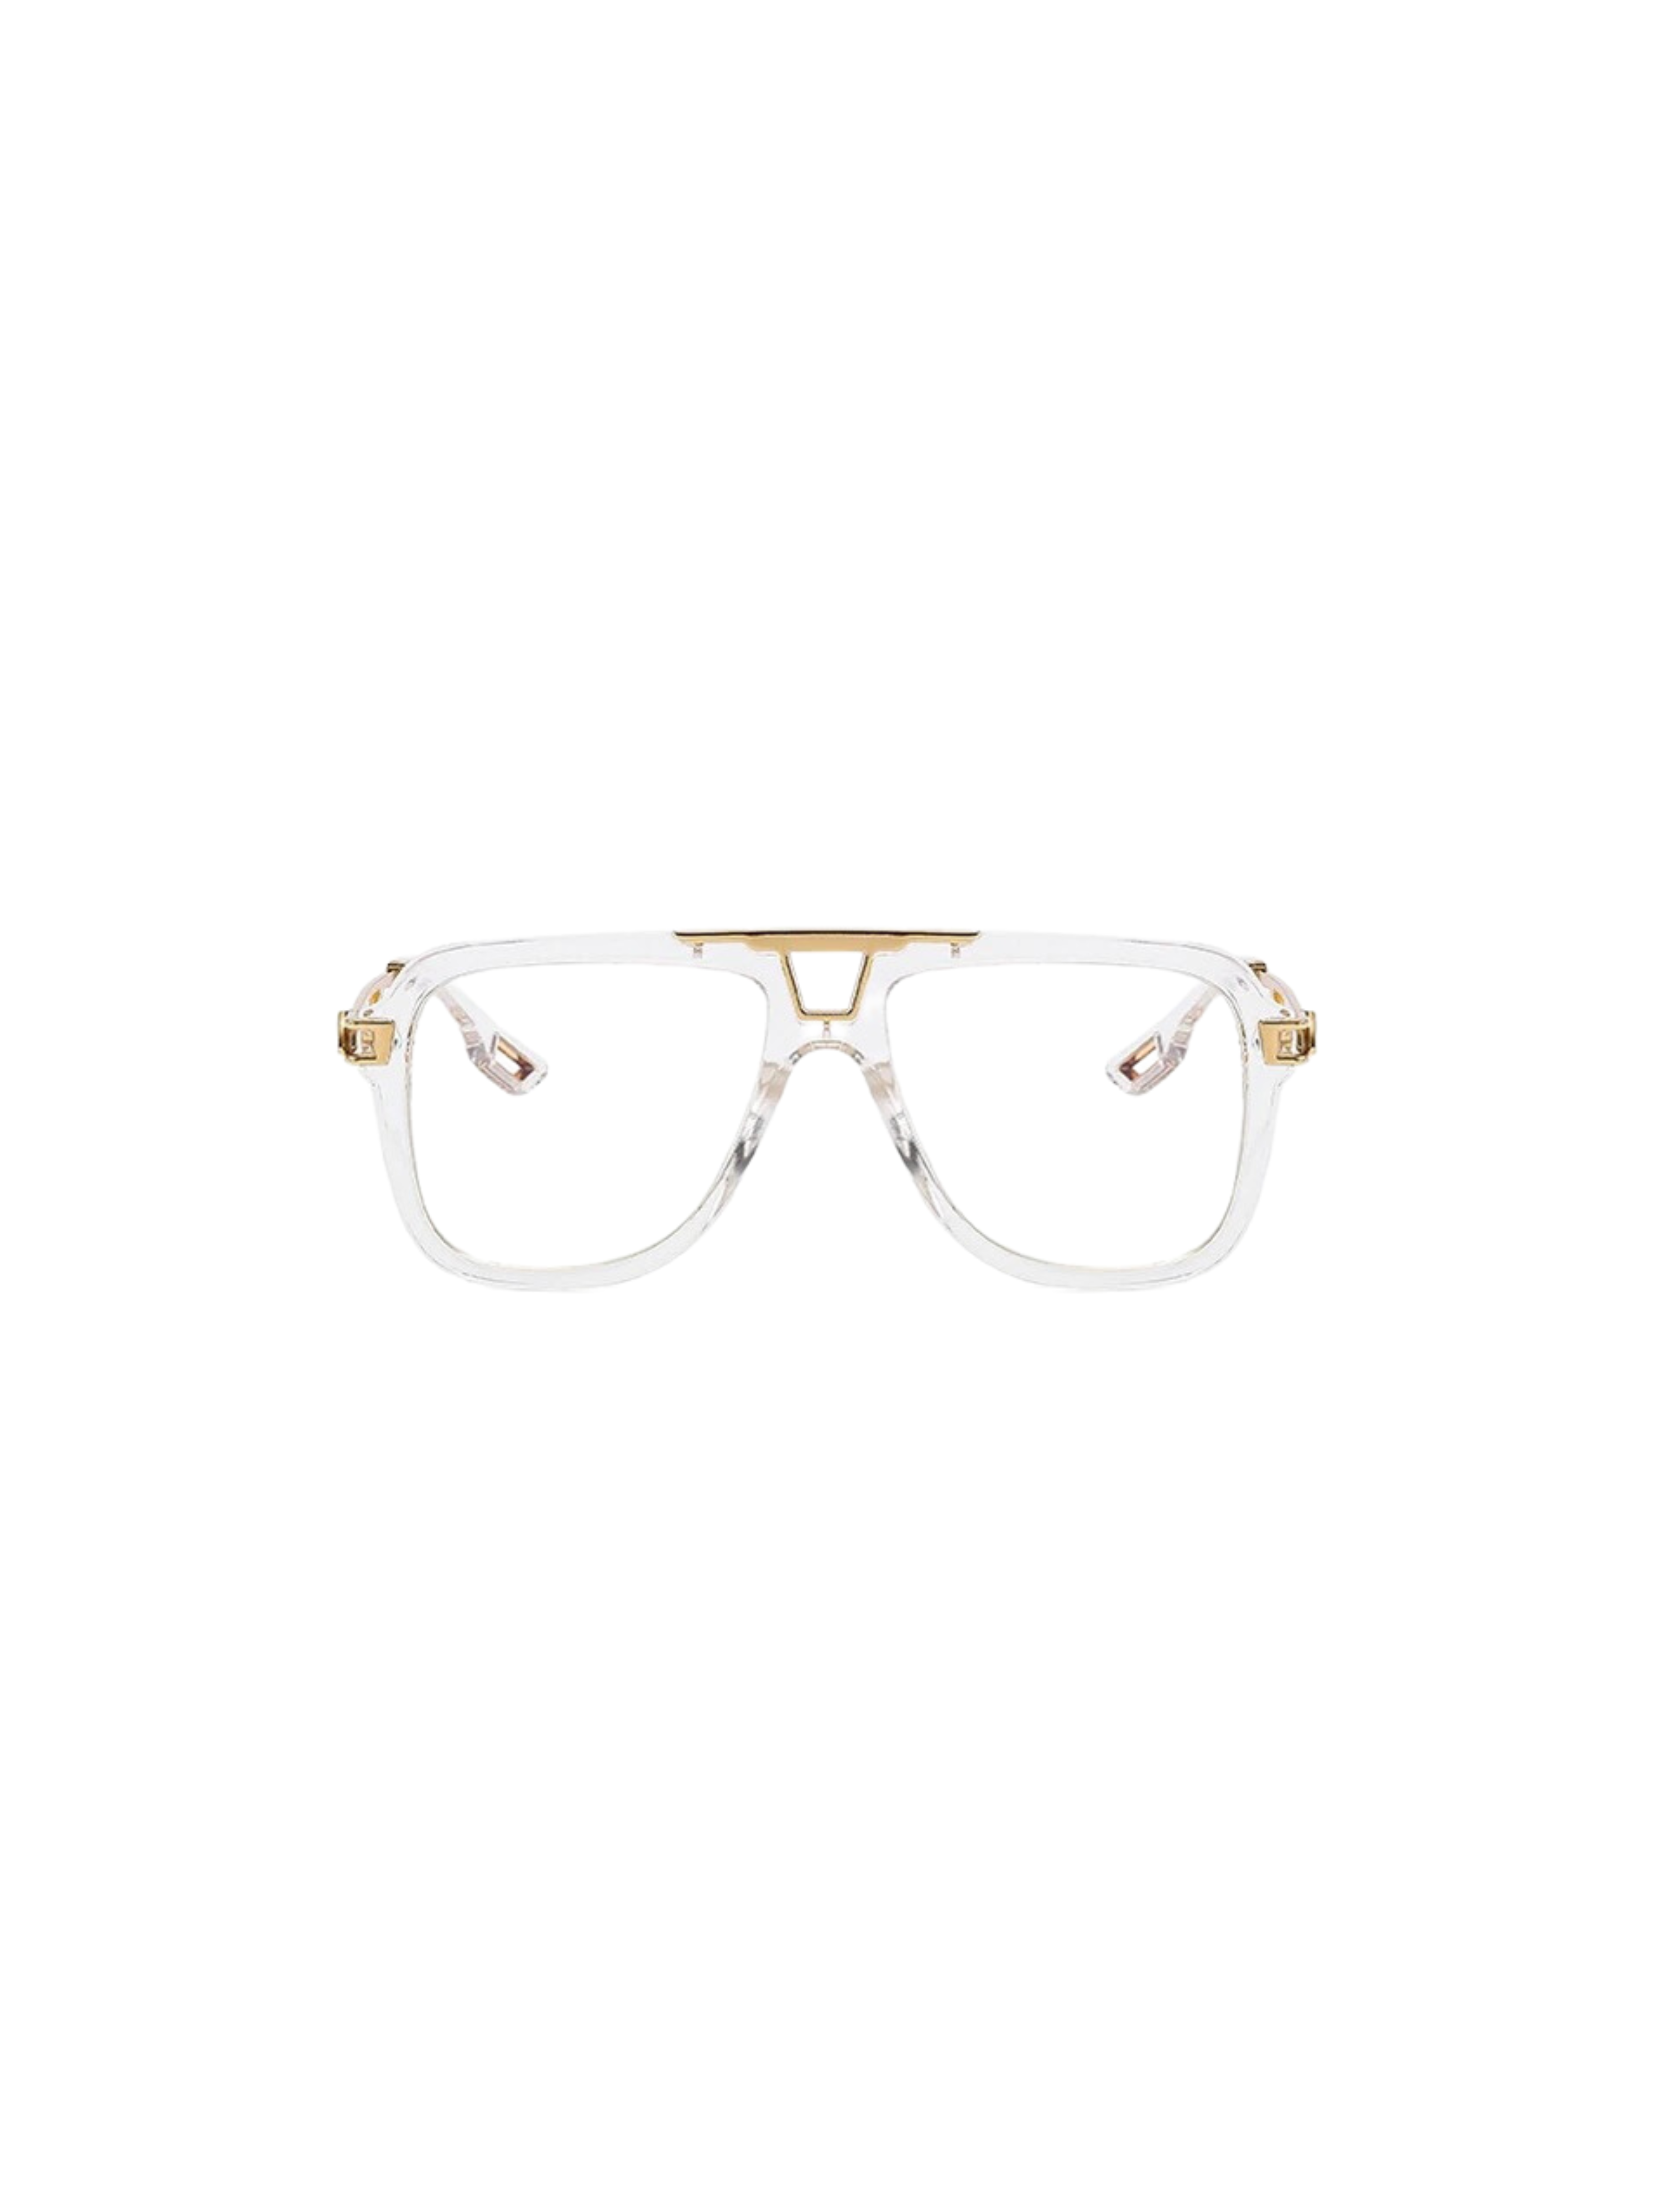 GOLDxTEAL clear frame rounded sunglasses with gold tone metal accents.